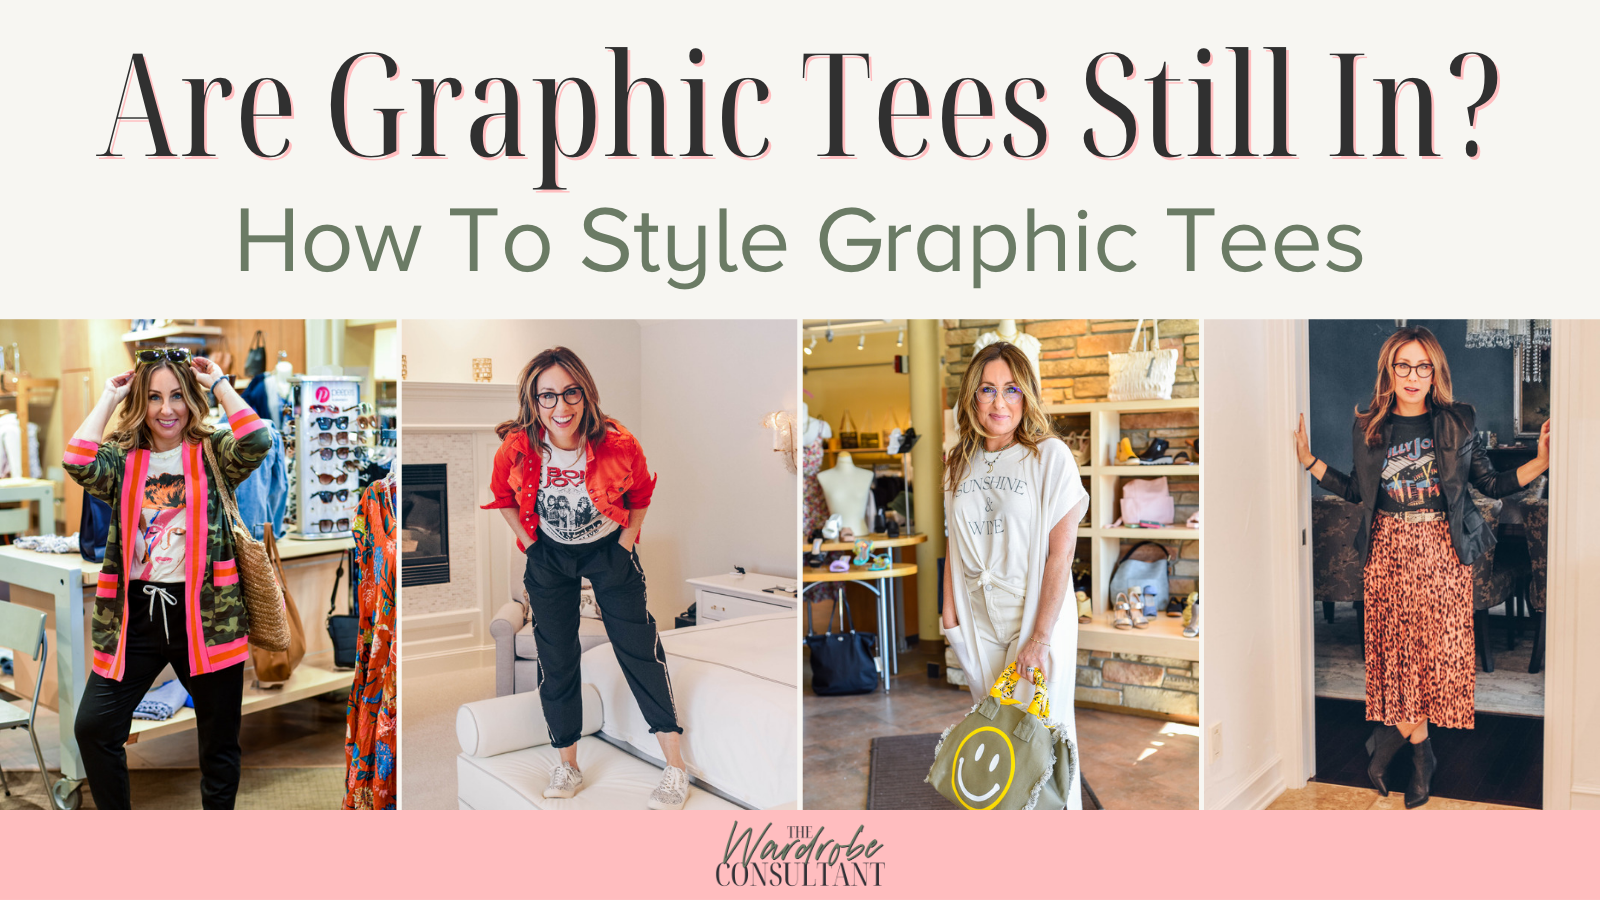 Trend to Try: The T-Shirt Dress - How to Shop for and Style a T-shirt Dress!